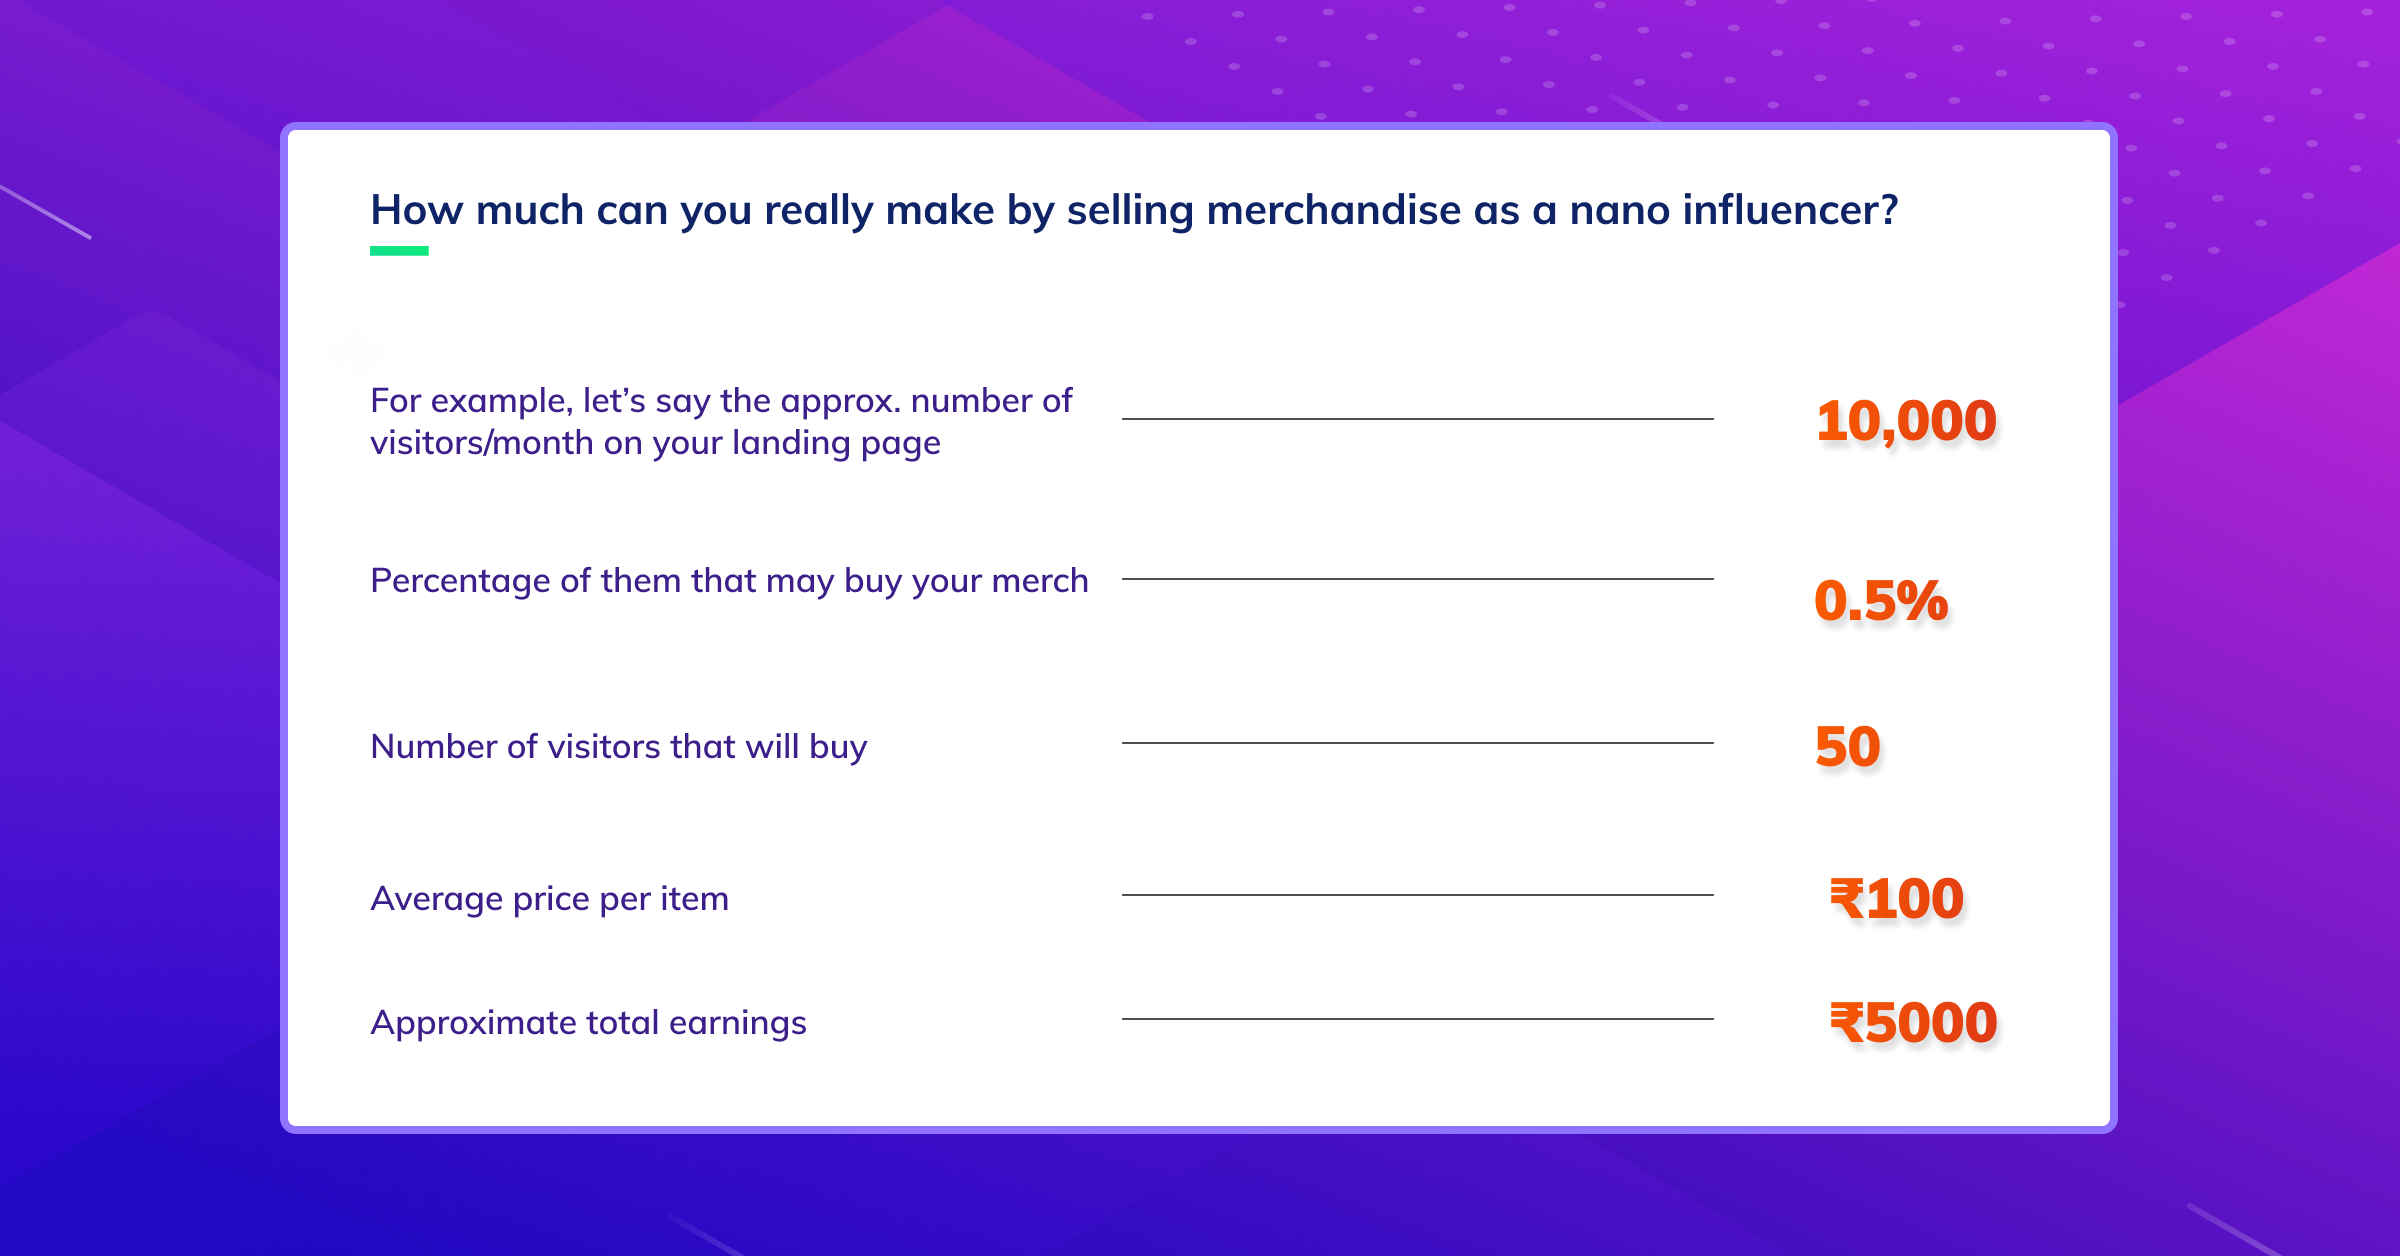 How much money can you earn as influencer by selling merchandise?